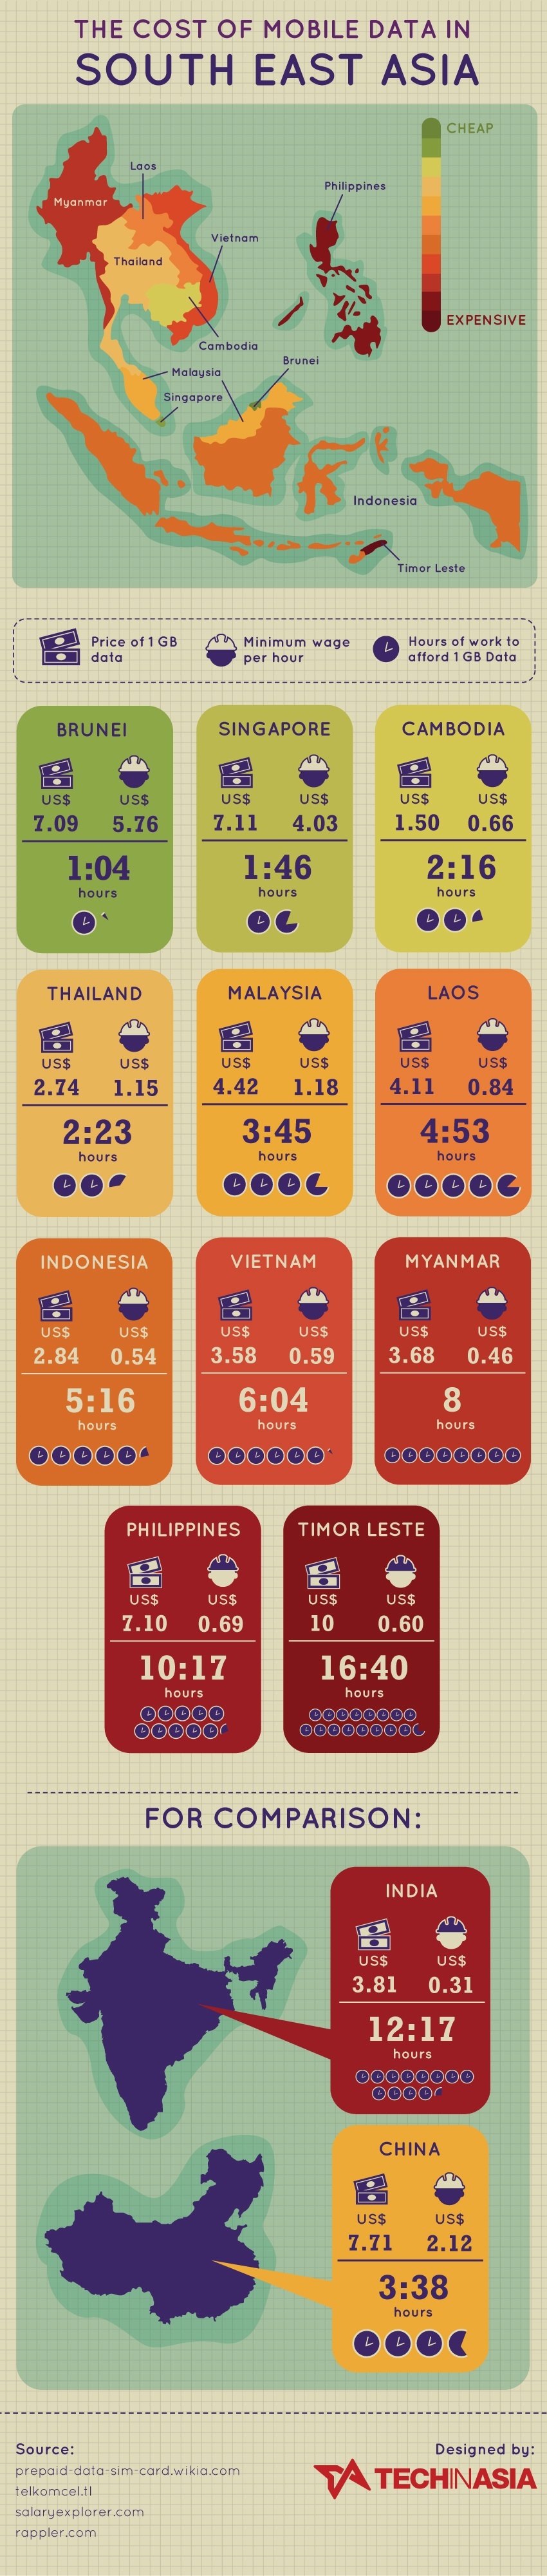 infographic-cost-of-mobile-data-sea